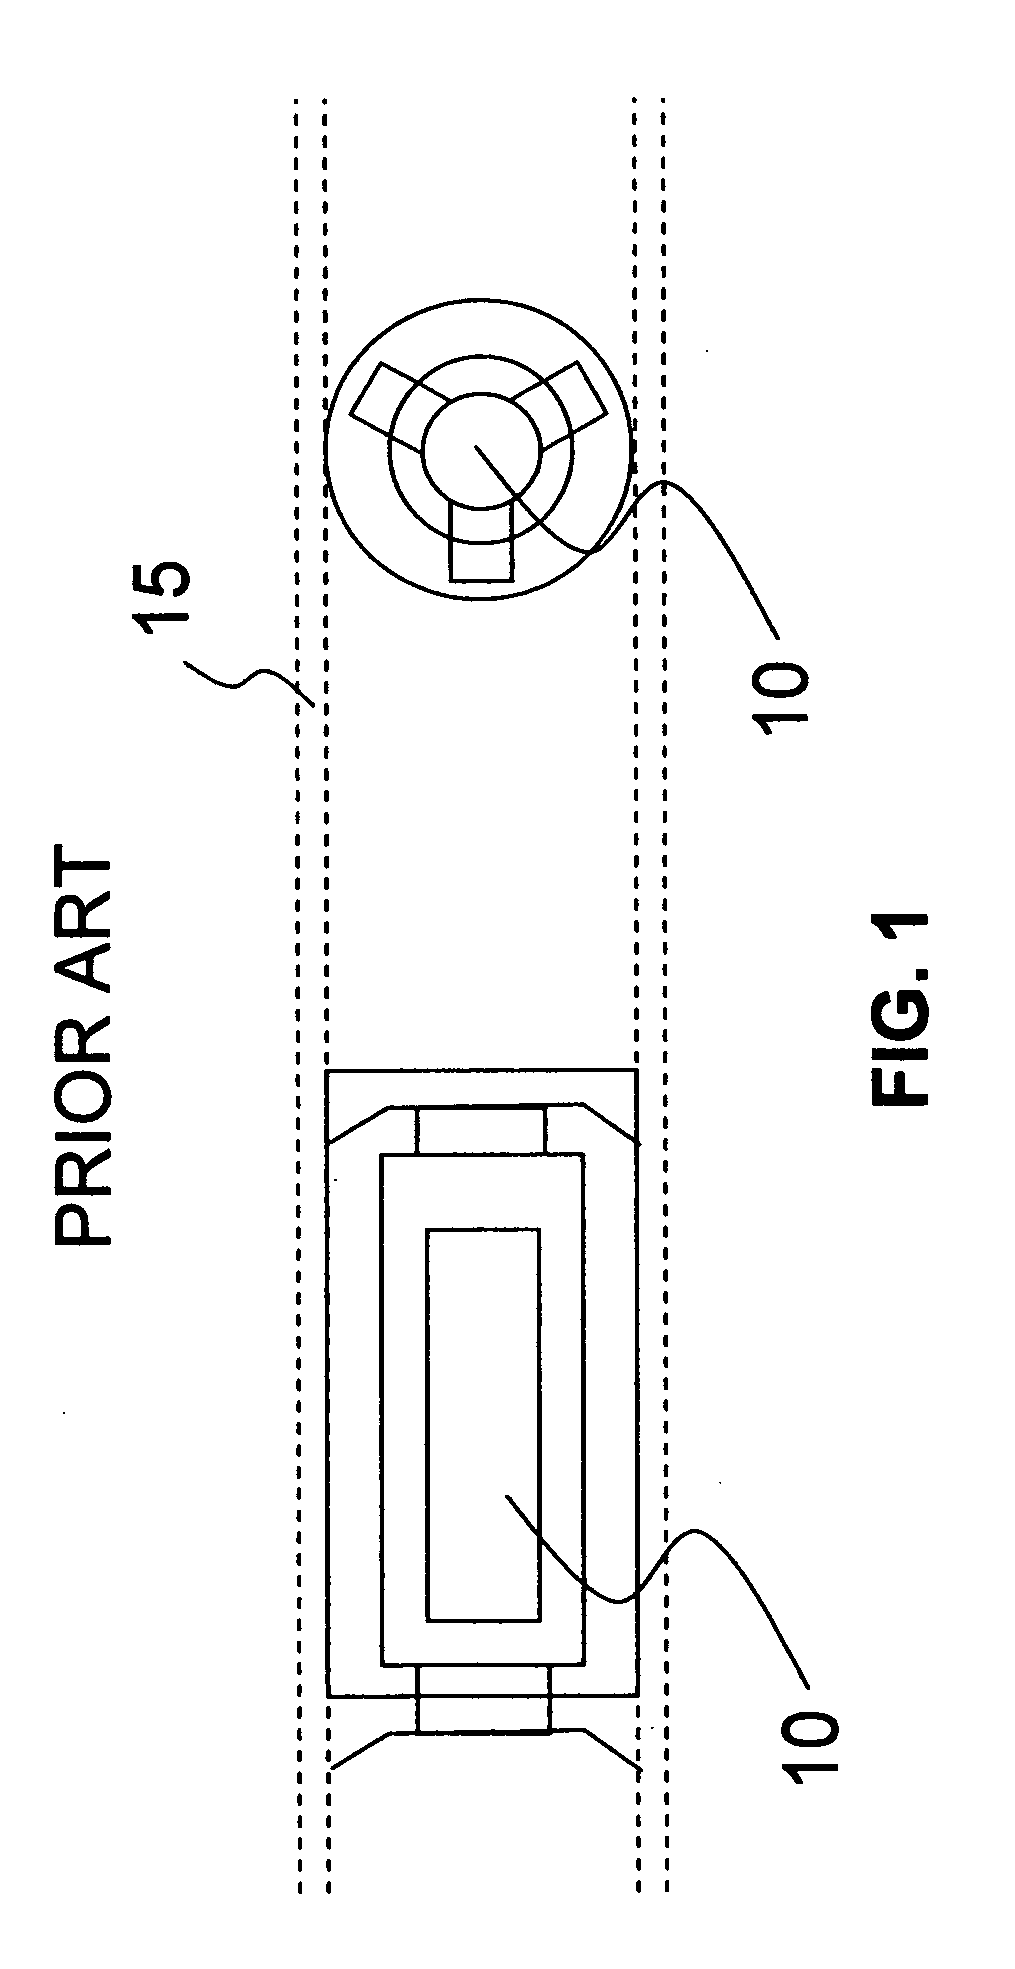 Systems and methods for operational, systems or integrity management of natural gas pipeline infrastructures